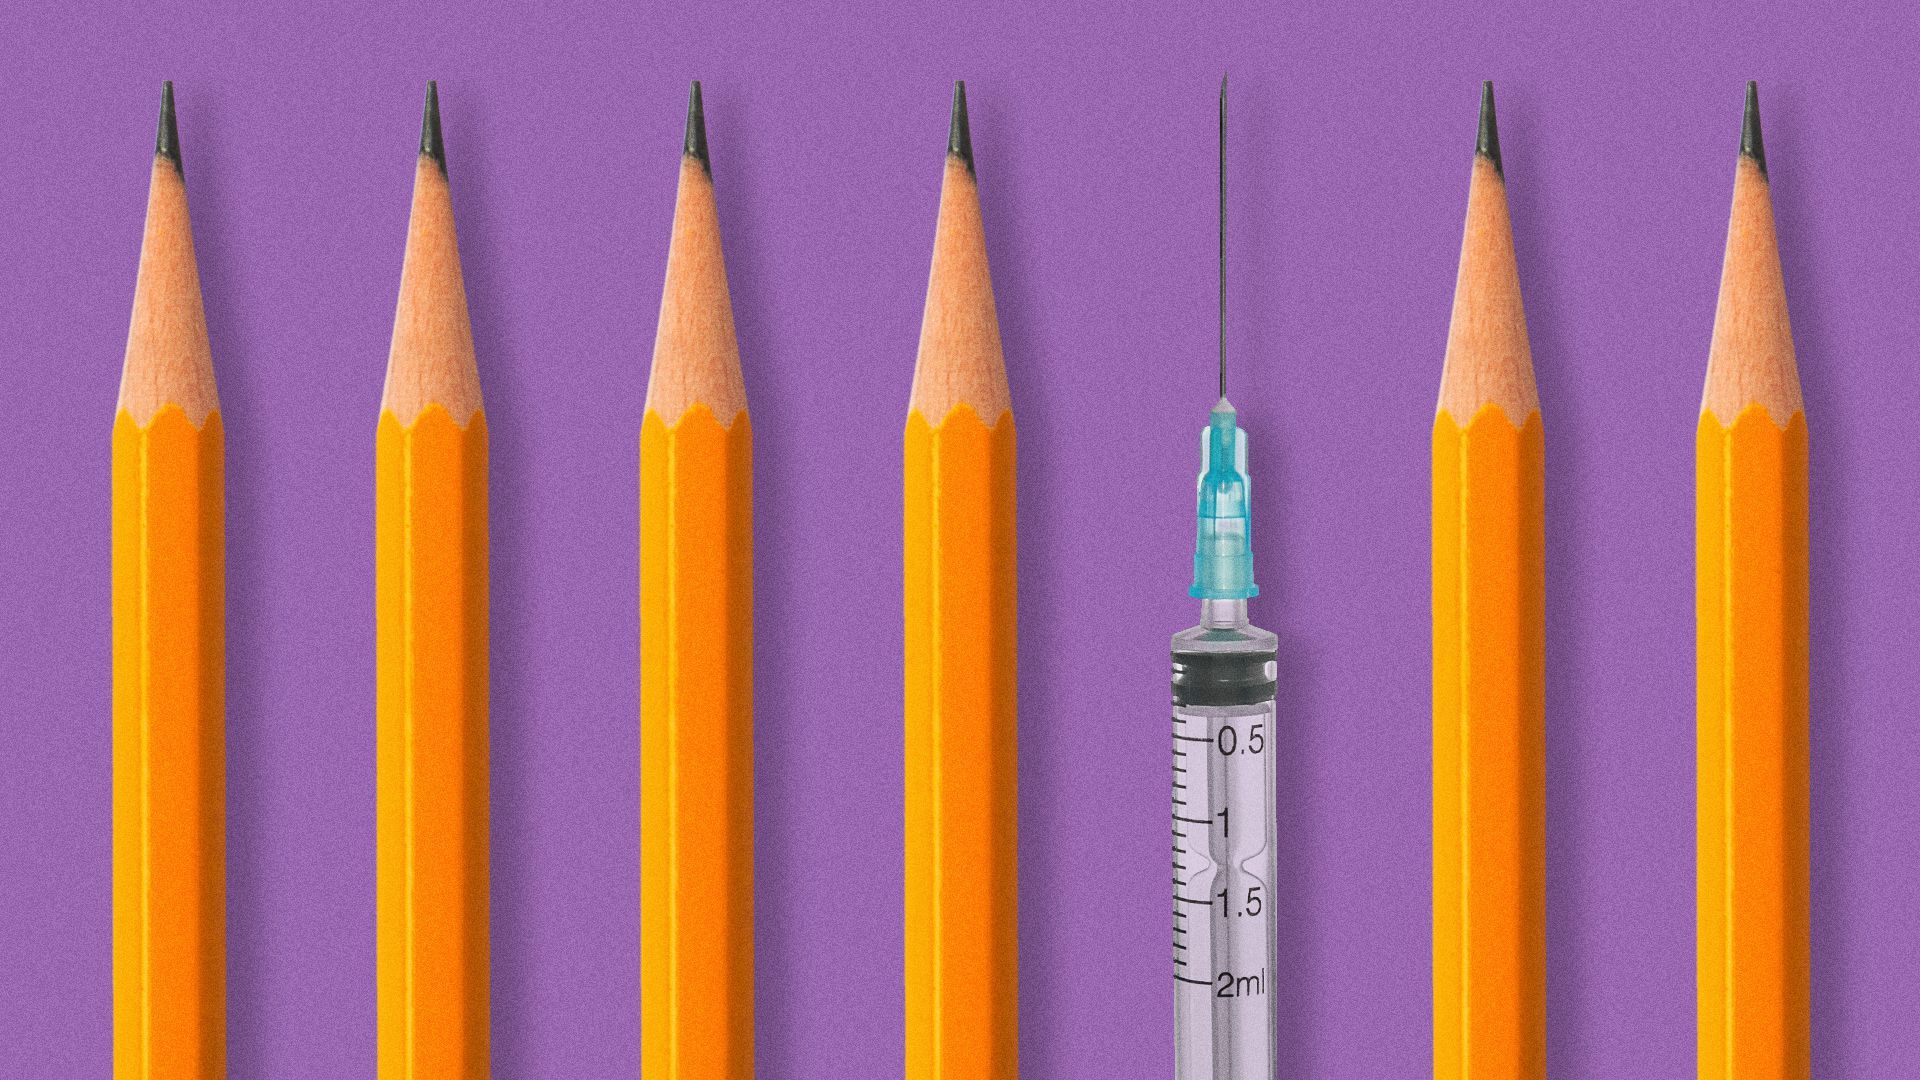 A row of pencils with a vaccine syringe replacing one pencil.